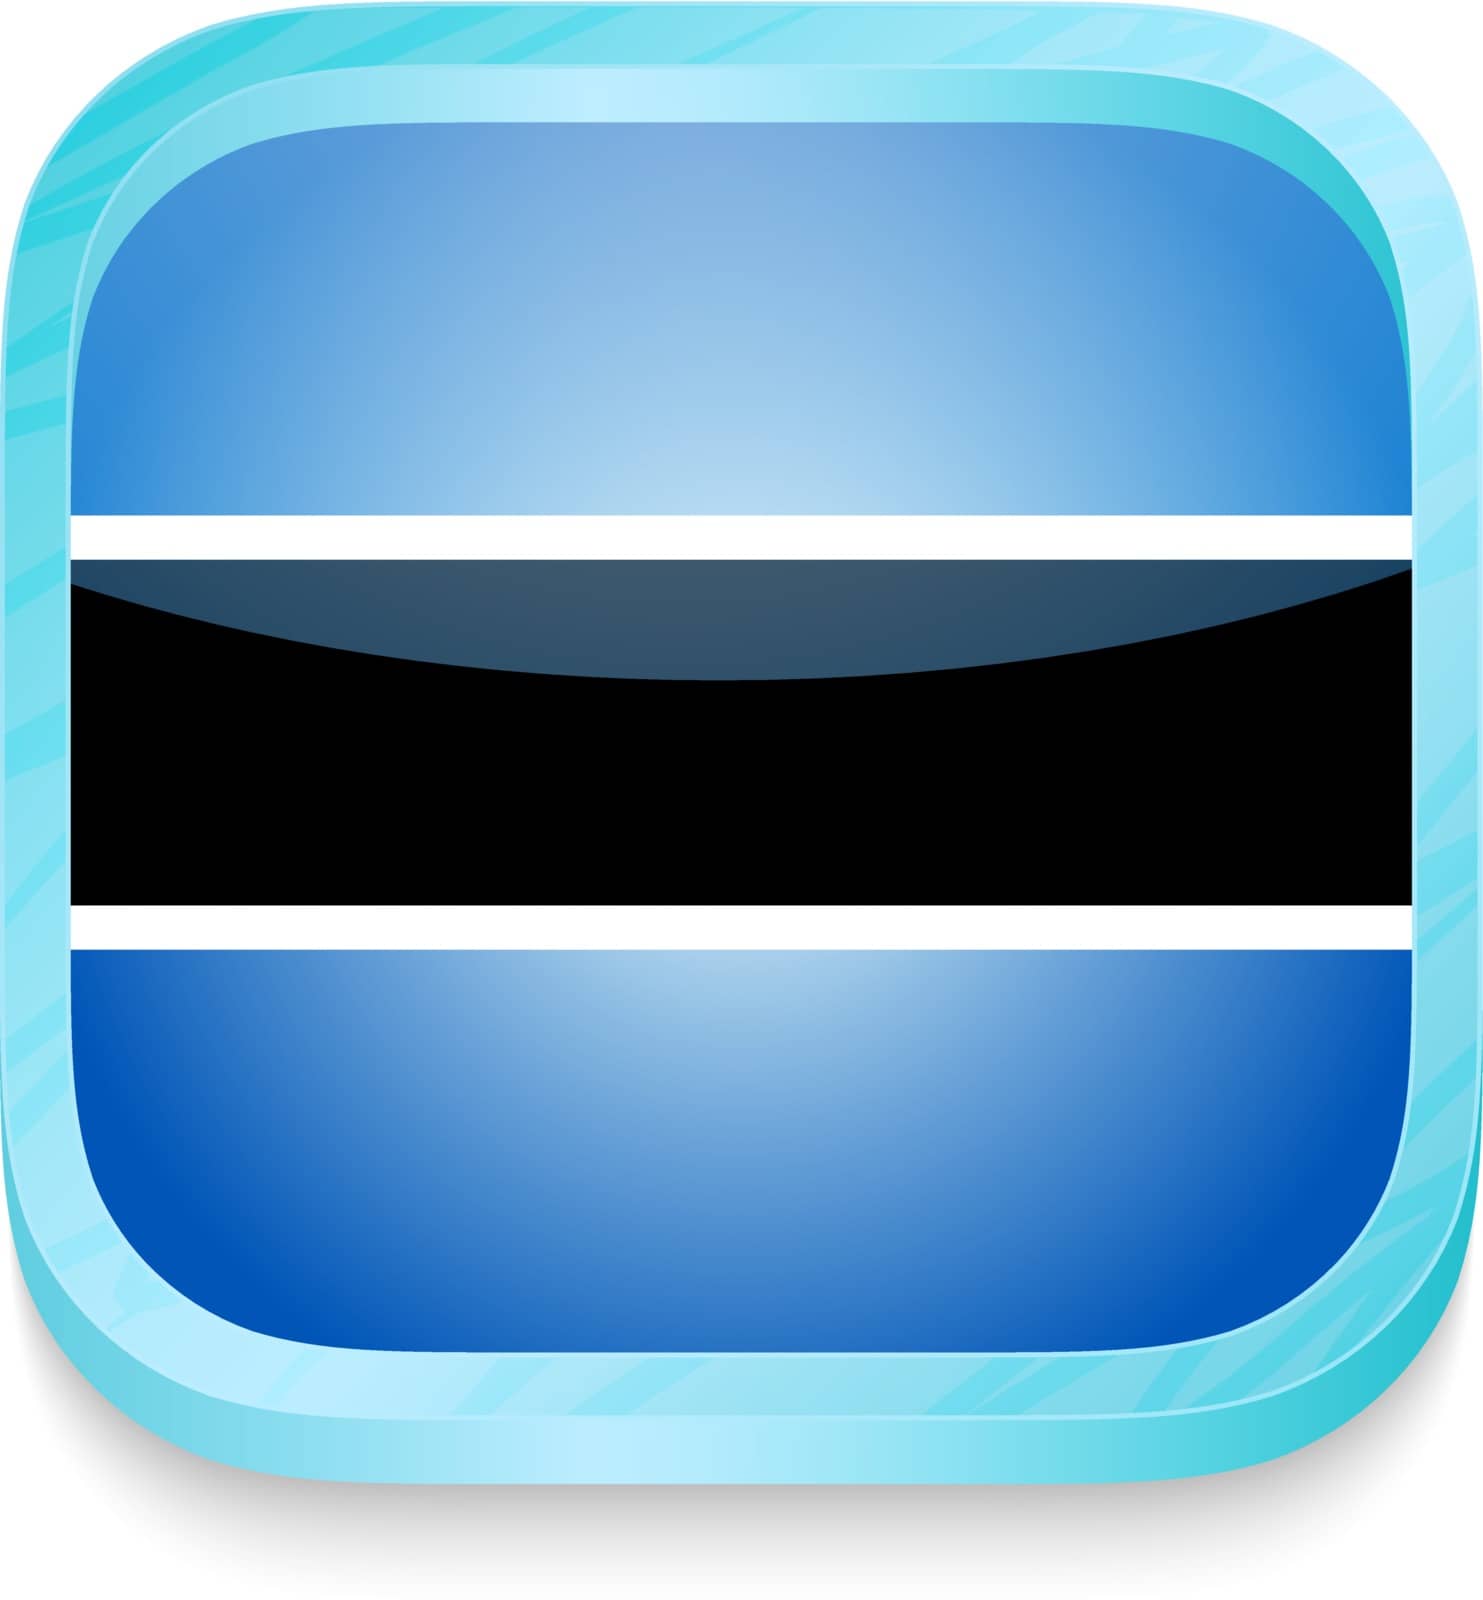 Smart phone button with Botswana flag